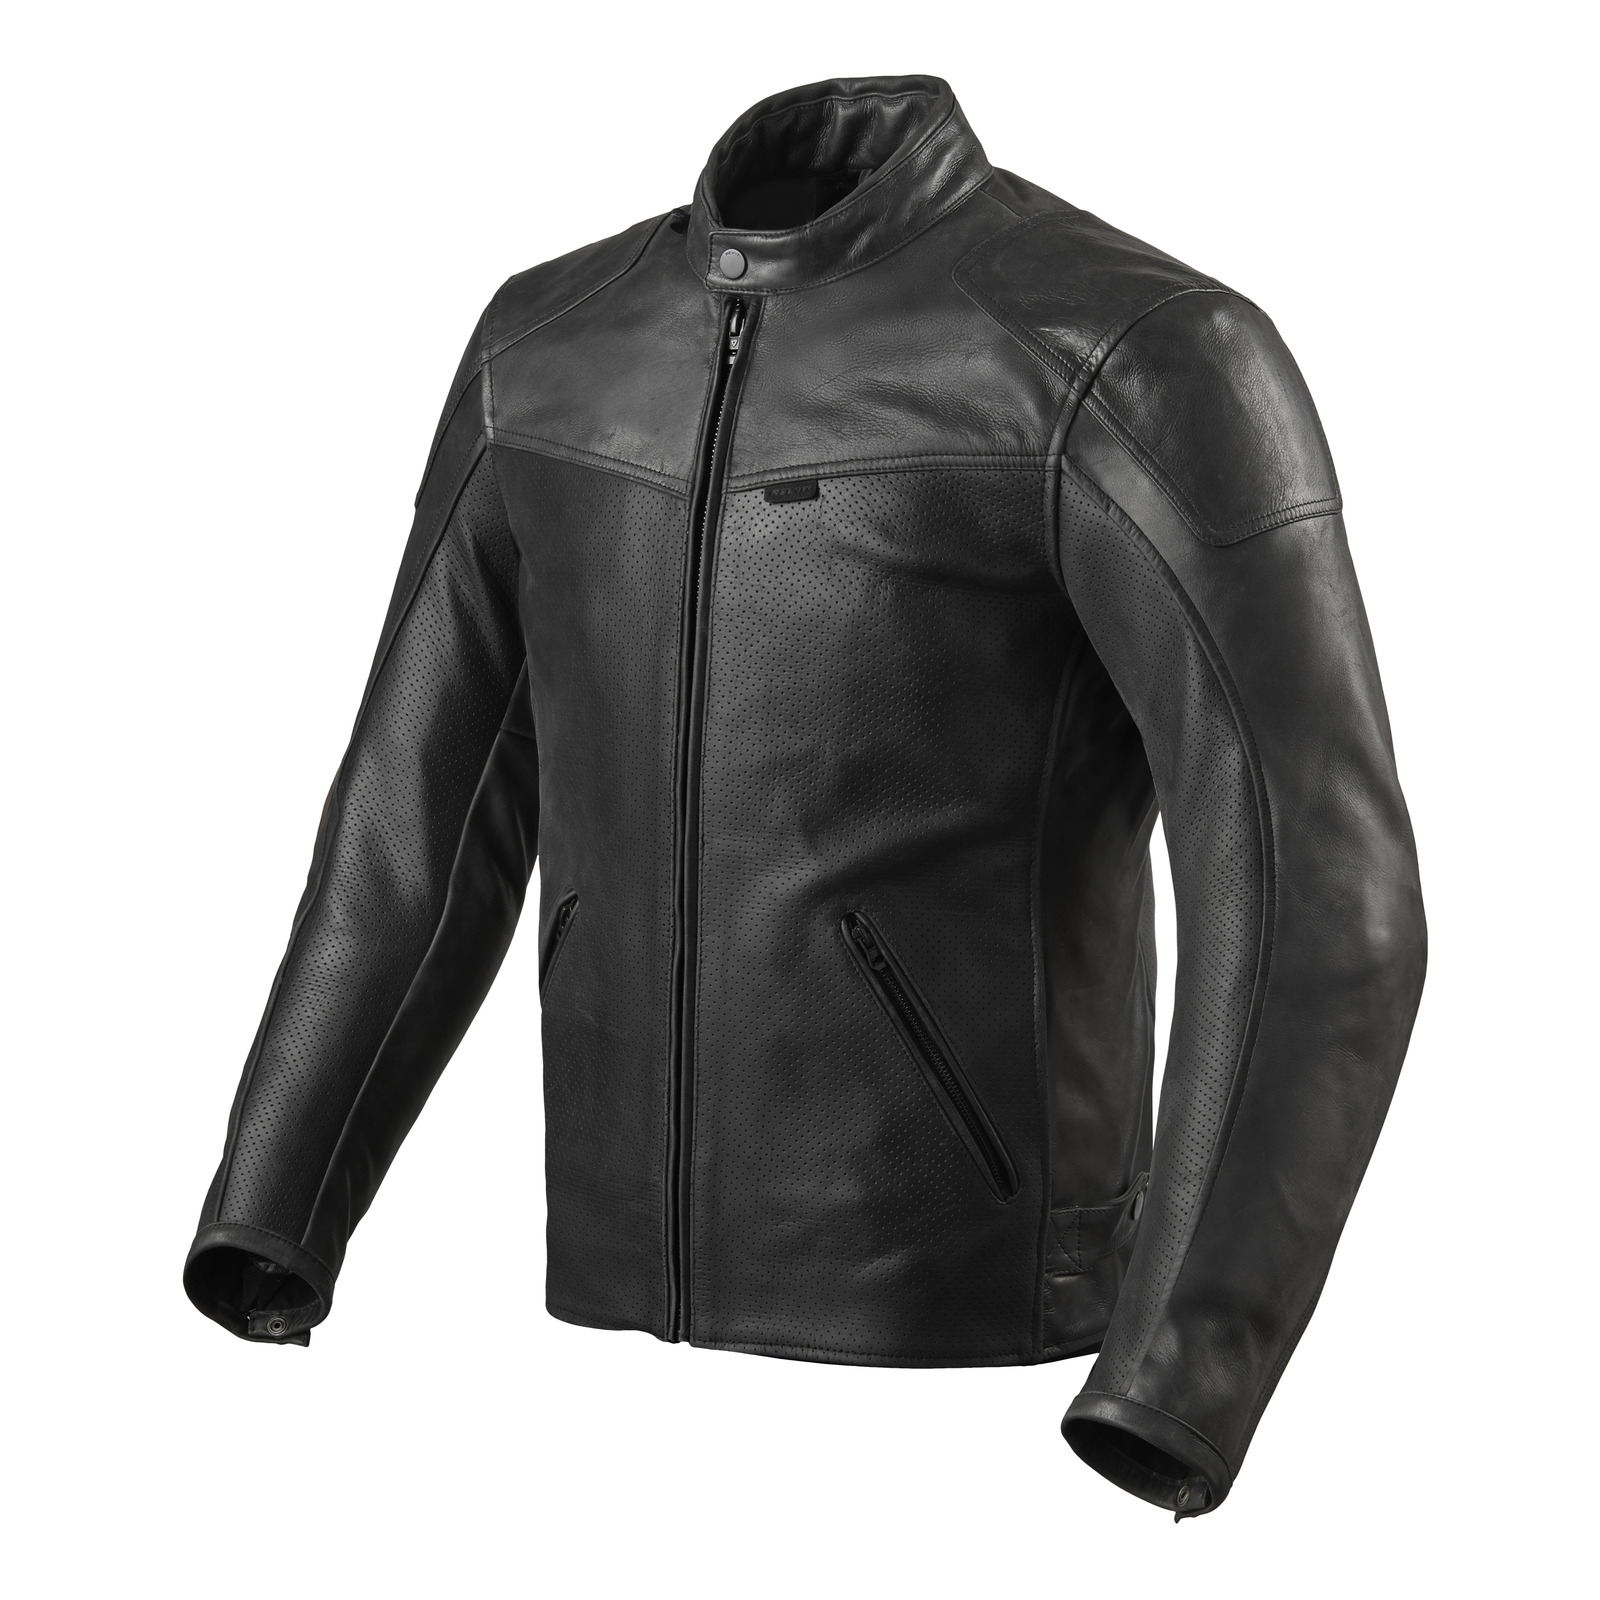 REV'IT! Sherwood Air Leather Motorcycle Jacket :: Express Post Delivery